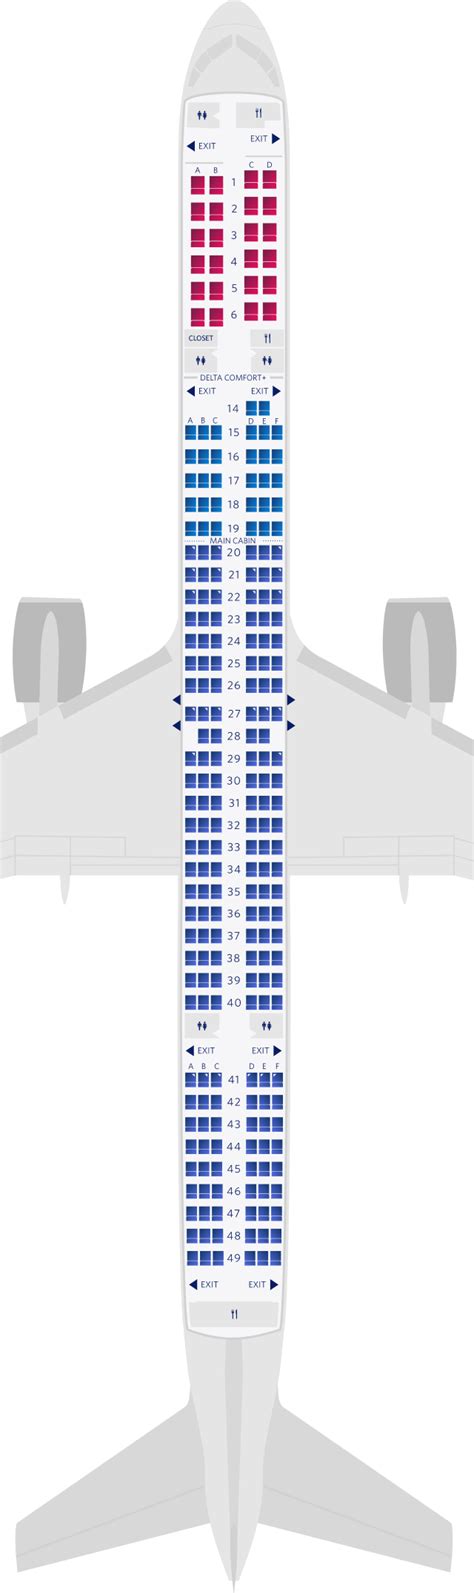 Delta 757 300 seat map. Things To Know About Delta 757 300 seat map. 